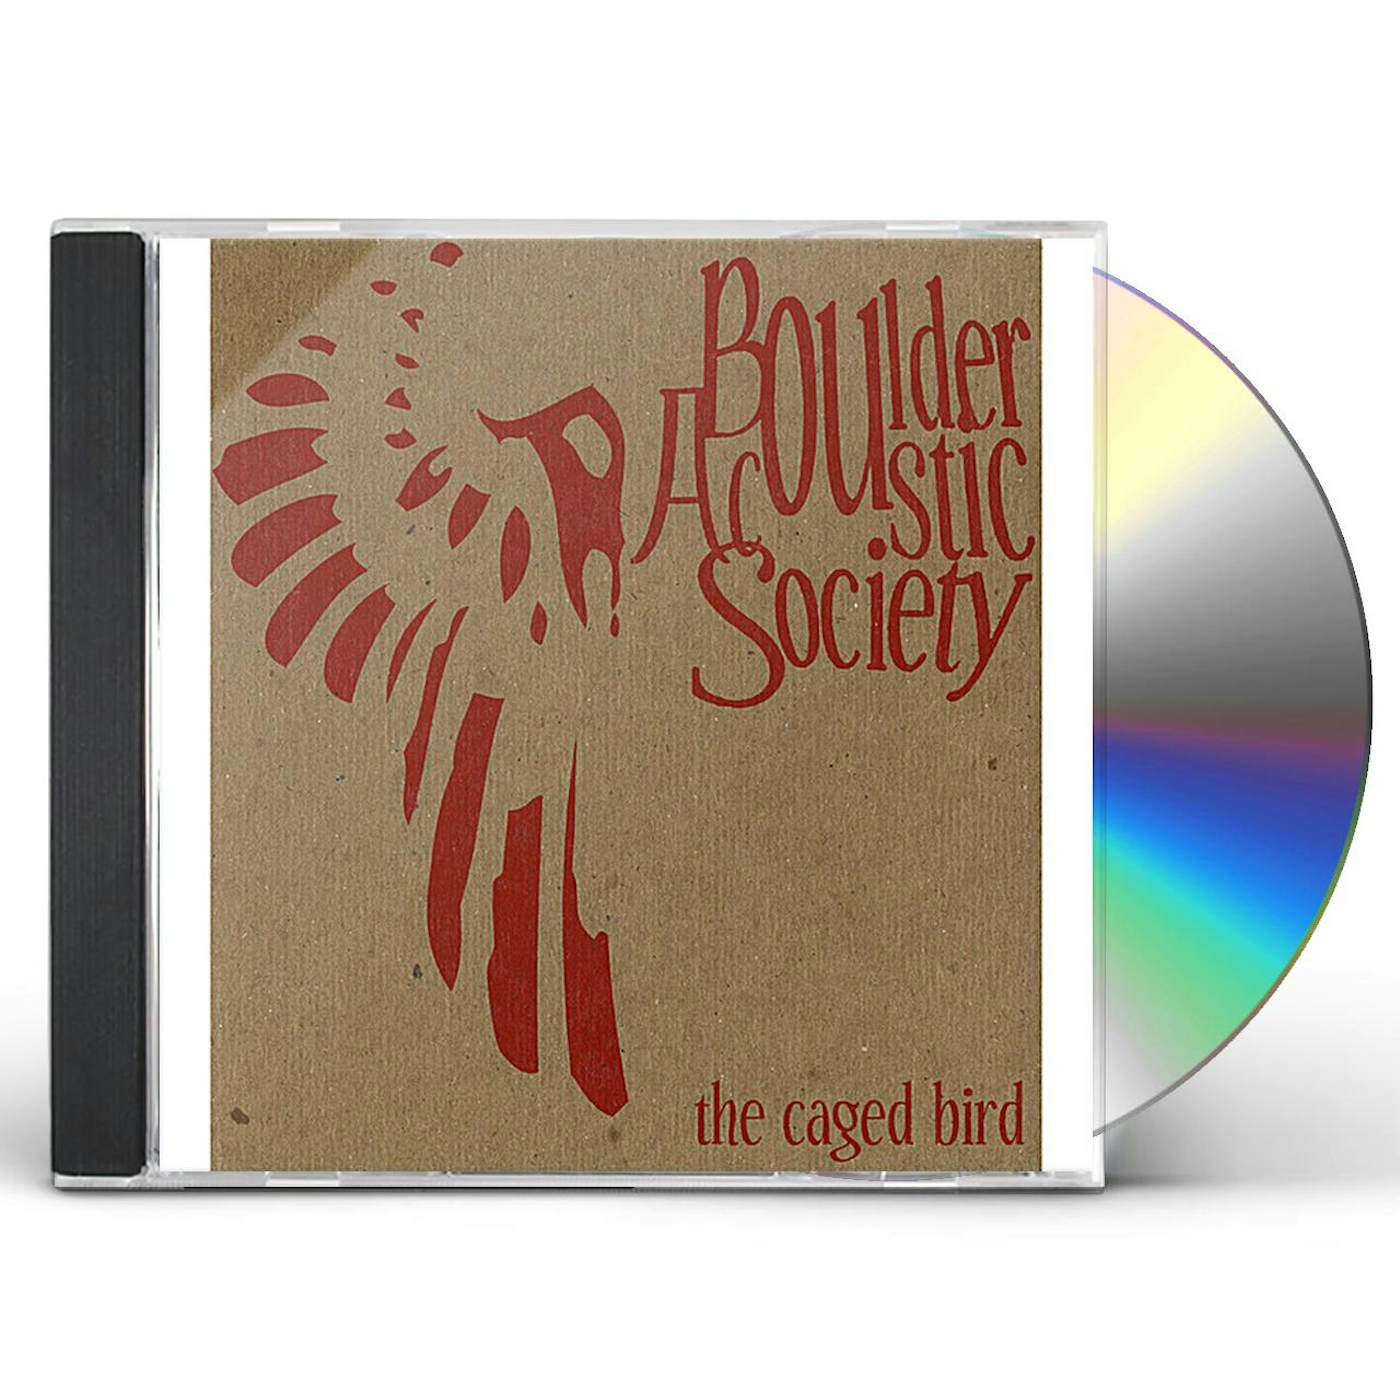 Boulder Acoustic Society CAGED BIRD CD